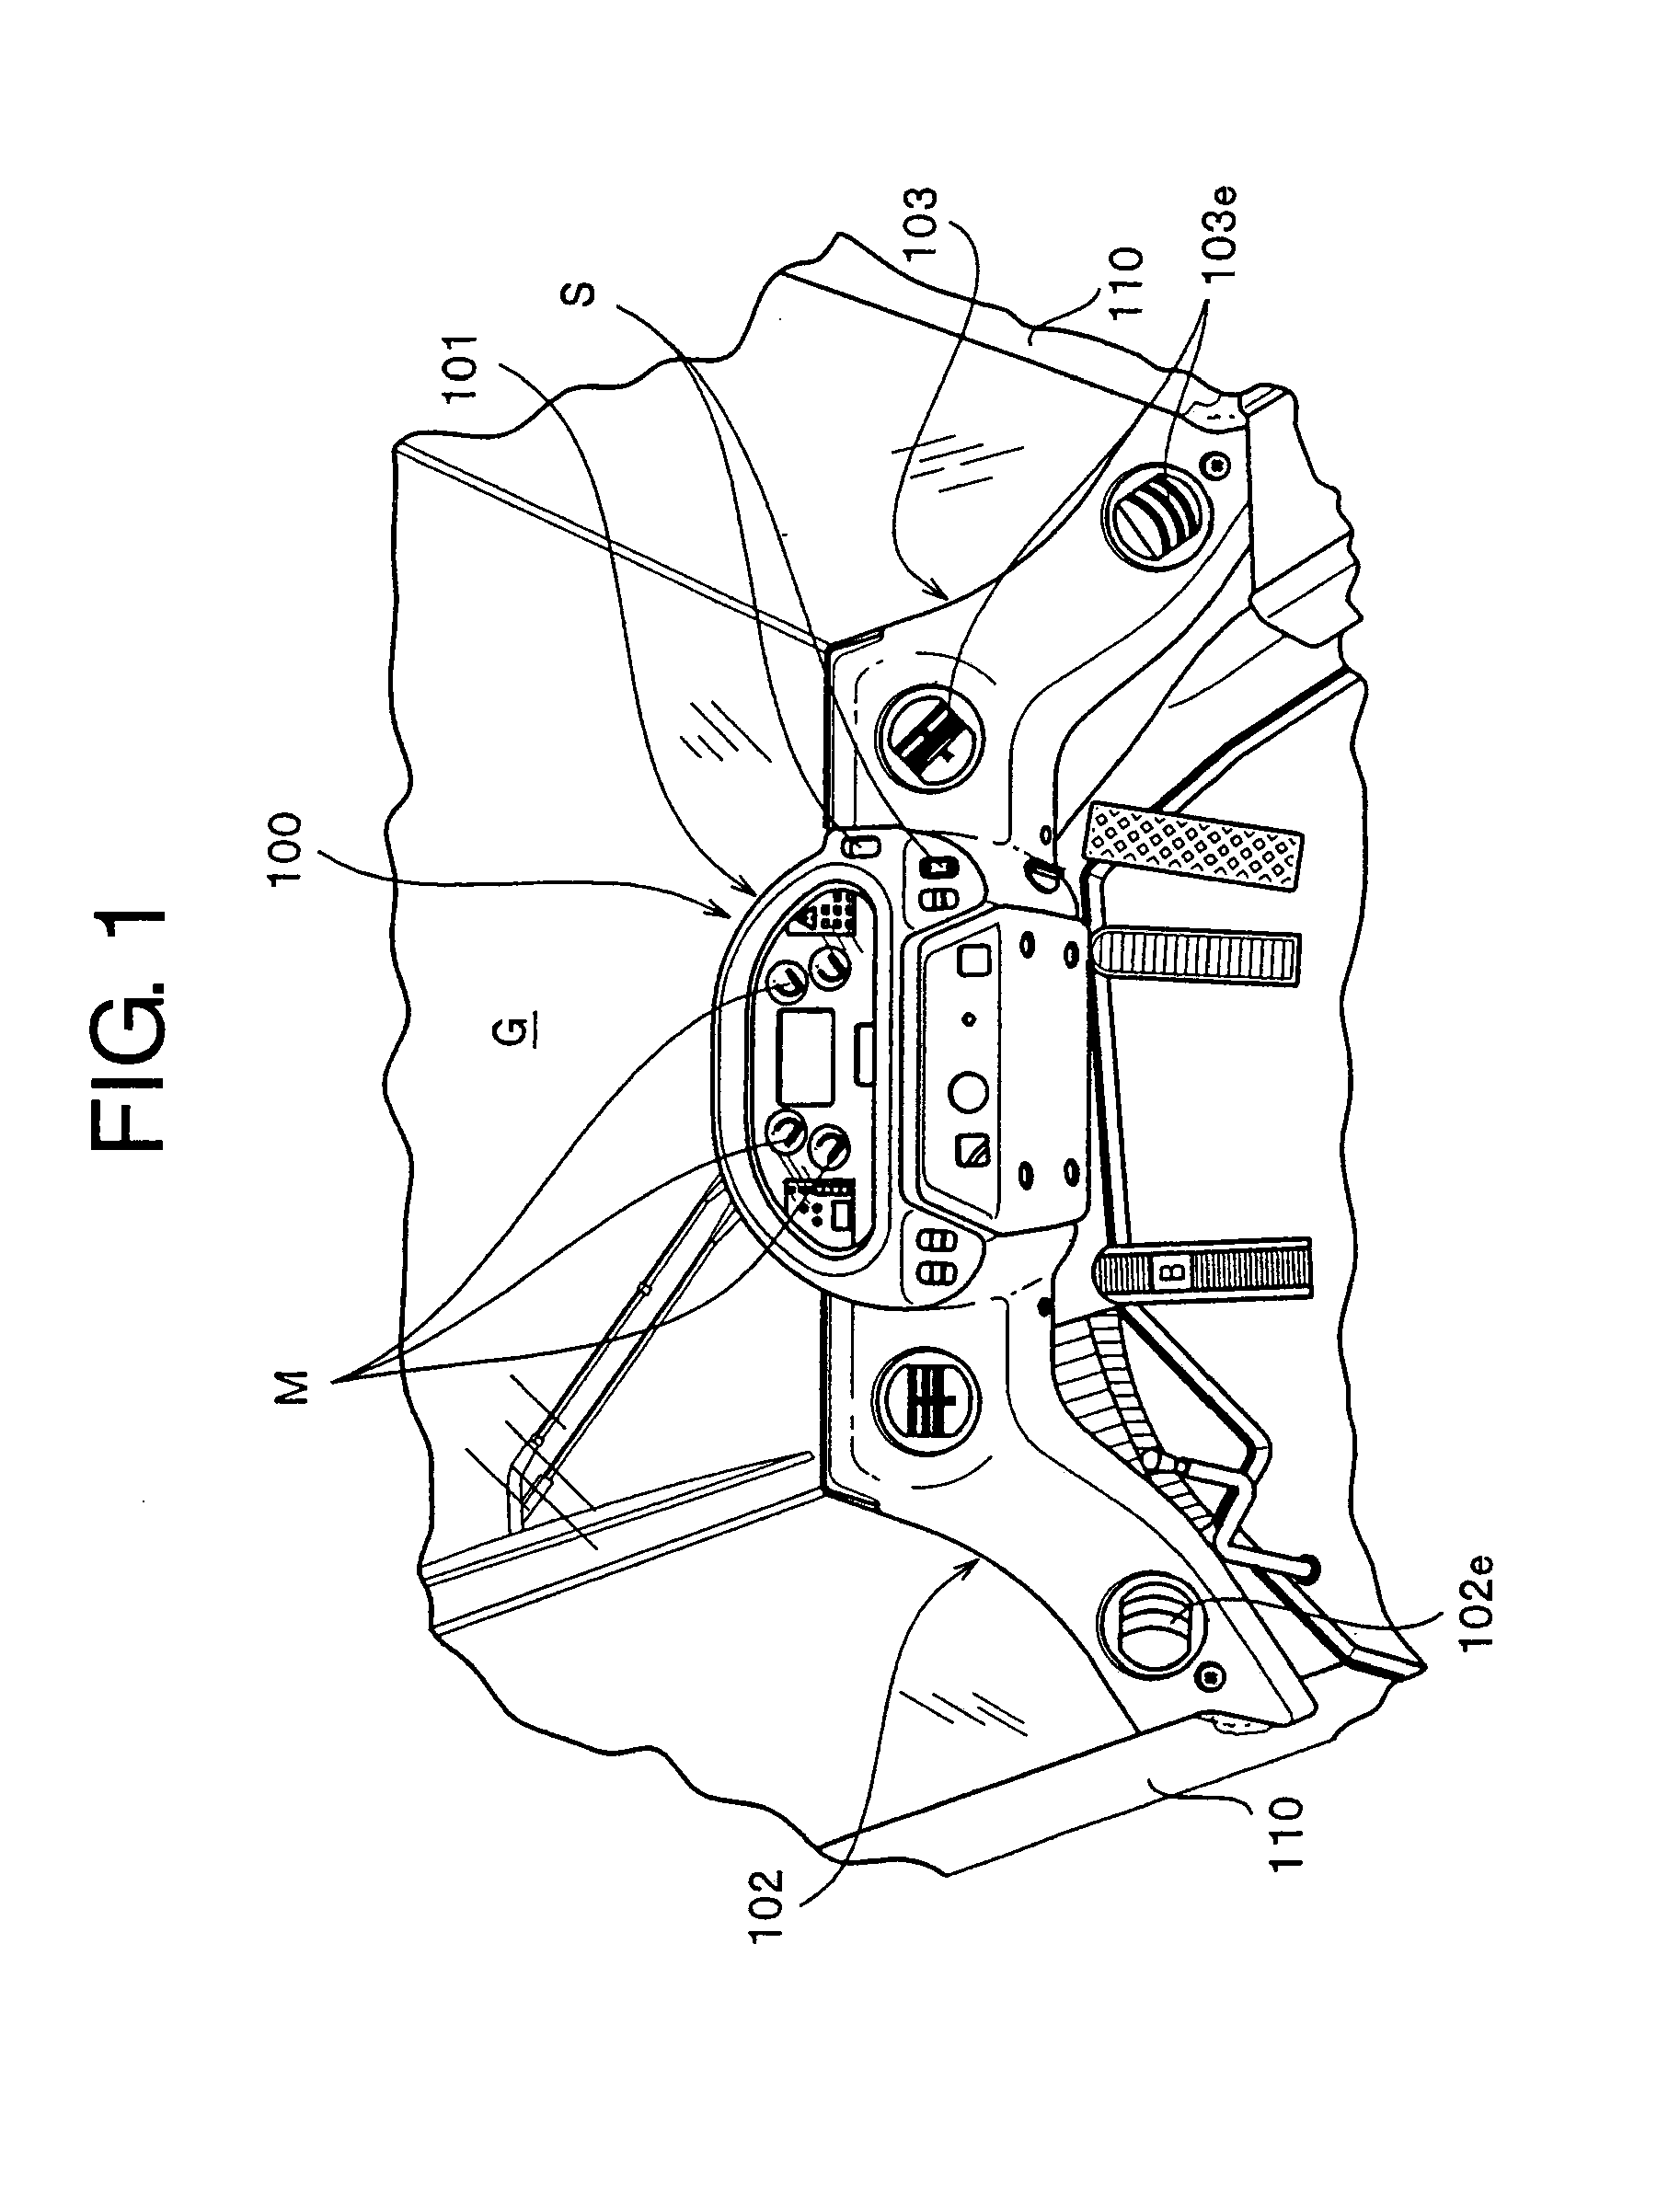 Interior Trim Member of Work Vehicle and Method of Manufacturing the Same